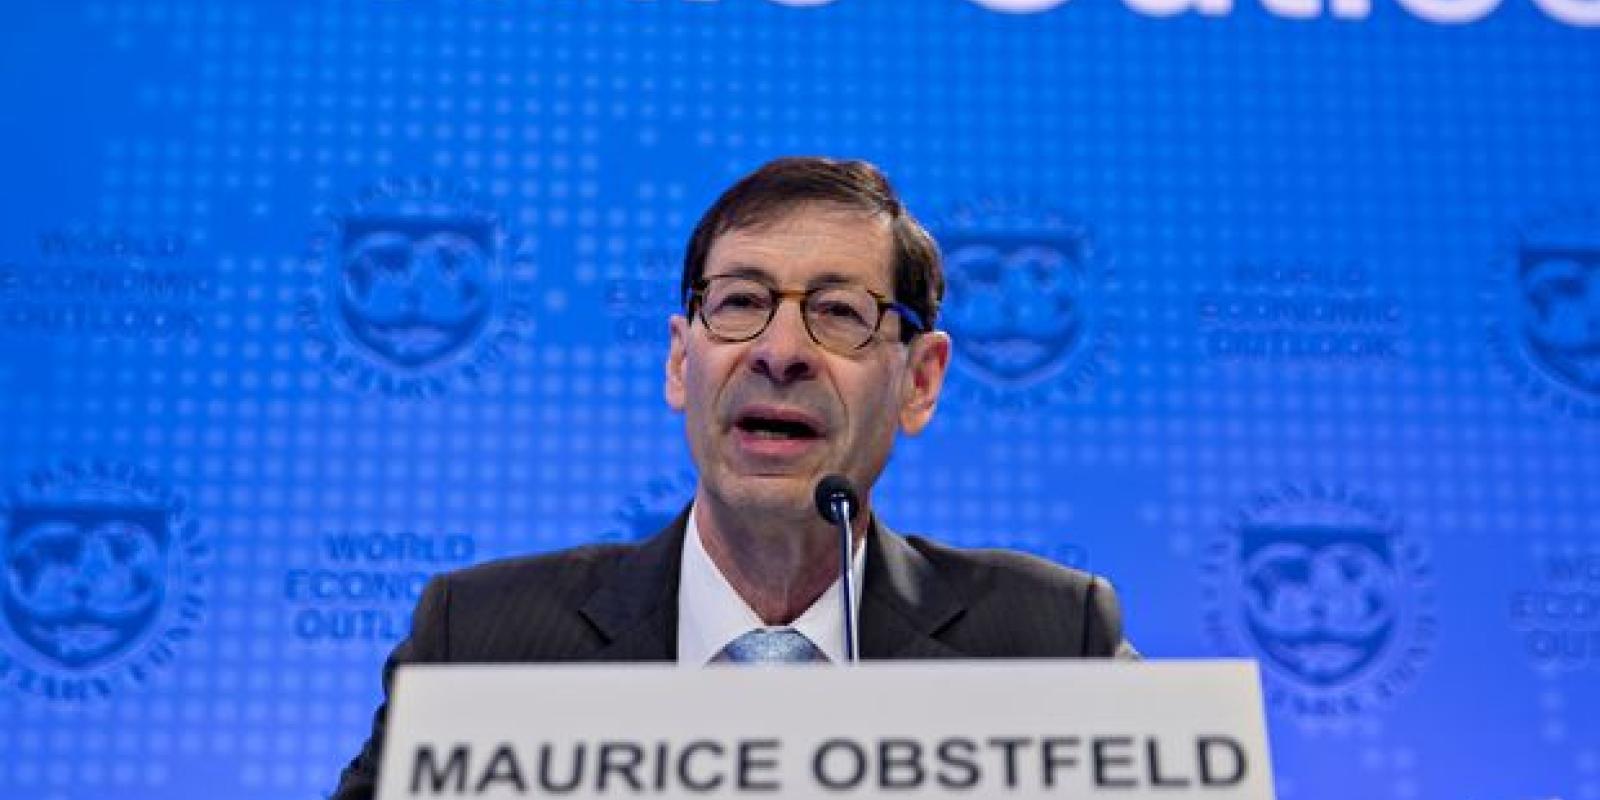 Chief Economist of the IMF Maurice Obstfeld